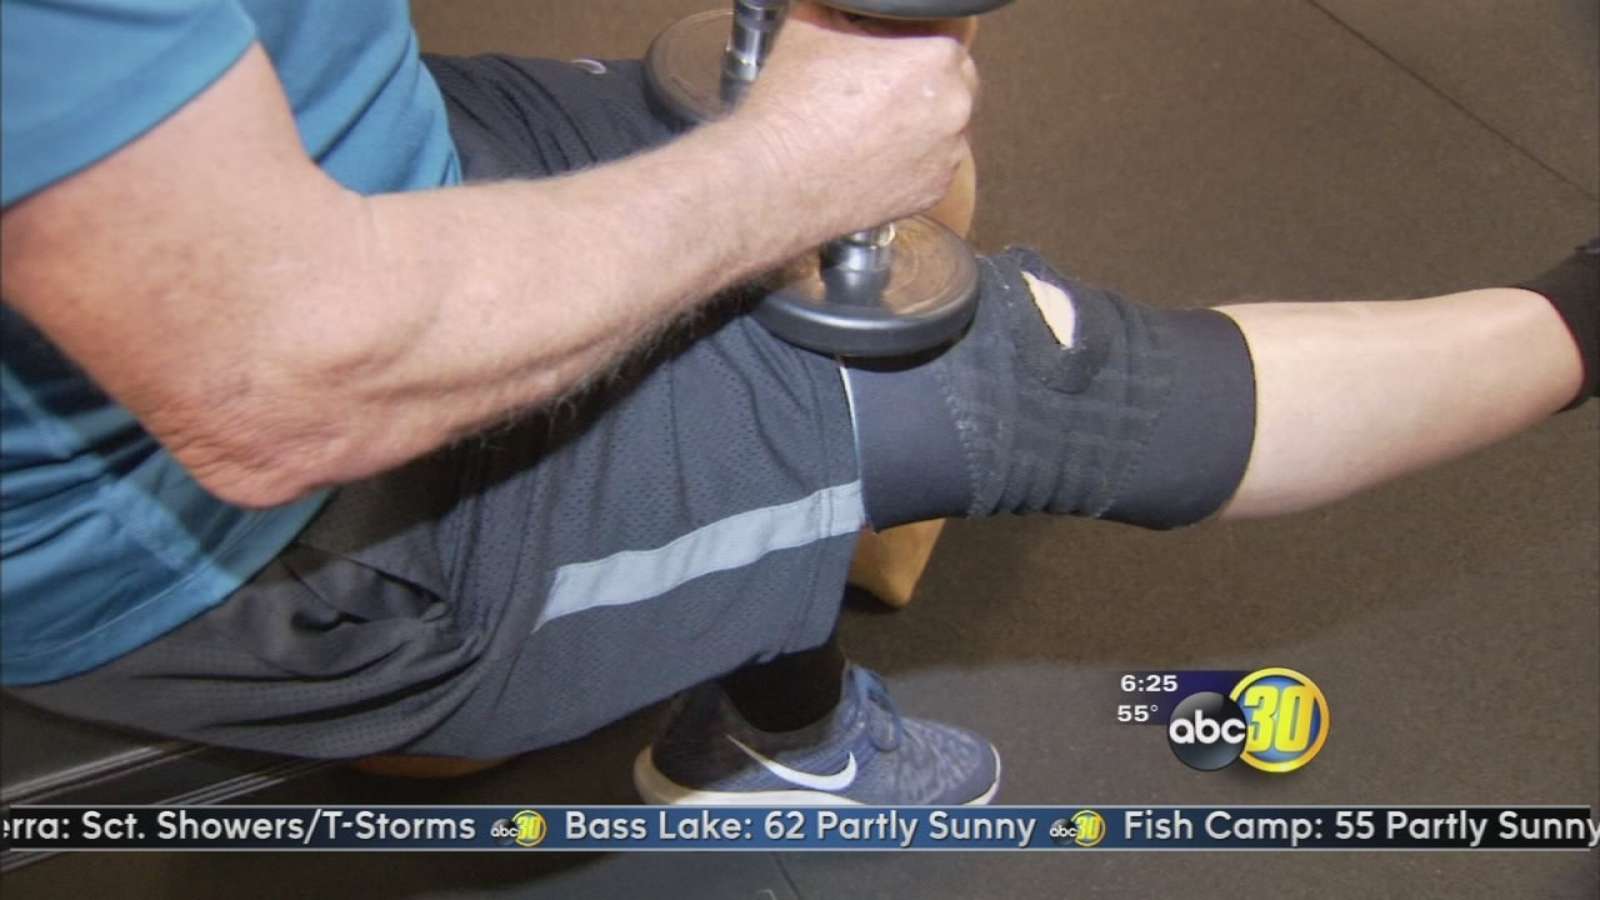 Work out Wednesday: Exercise with knee pain